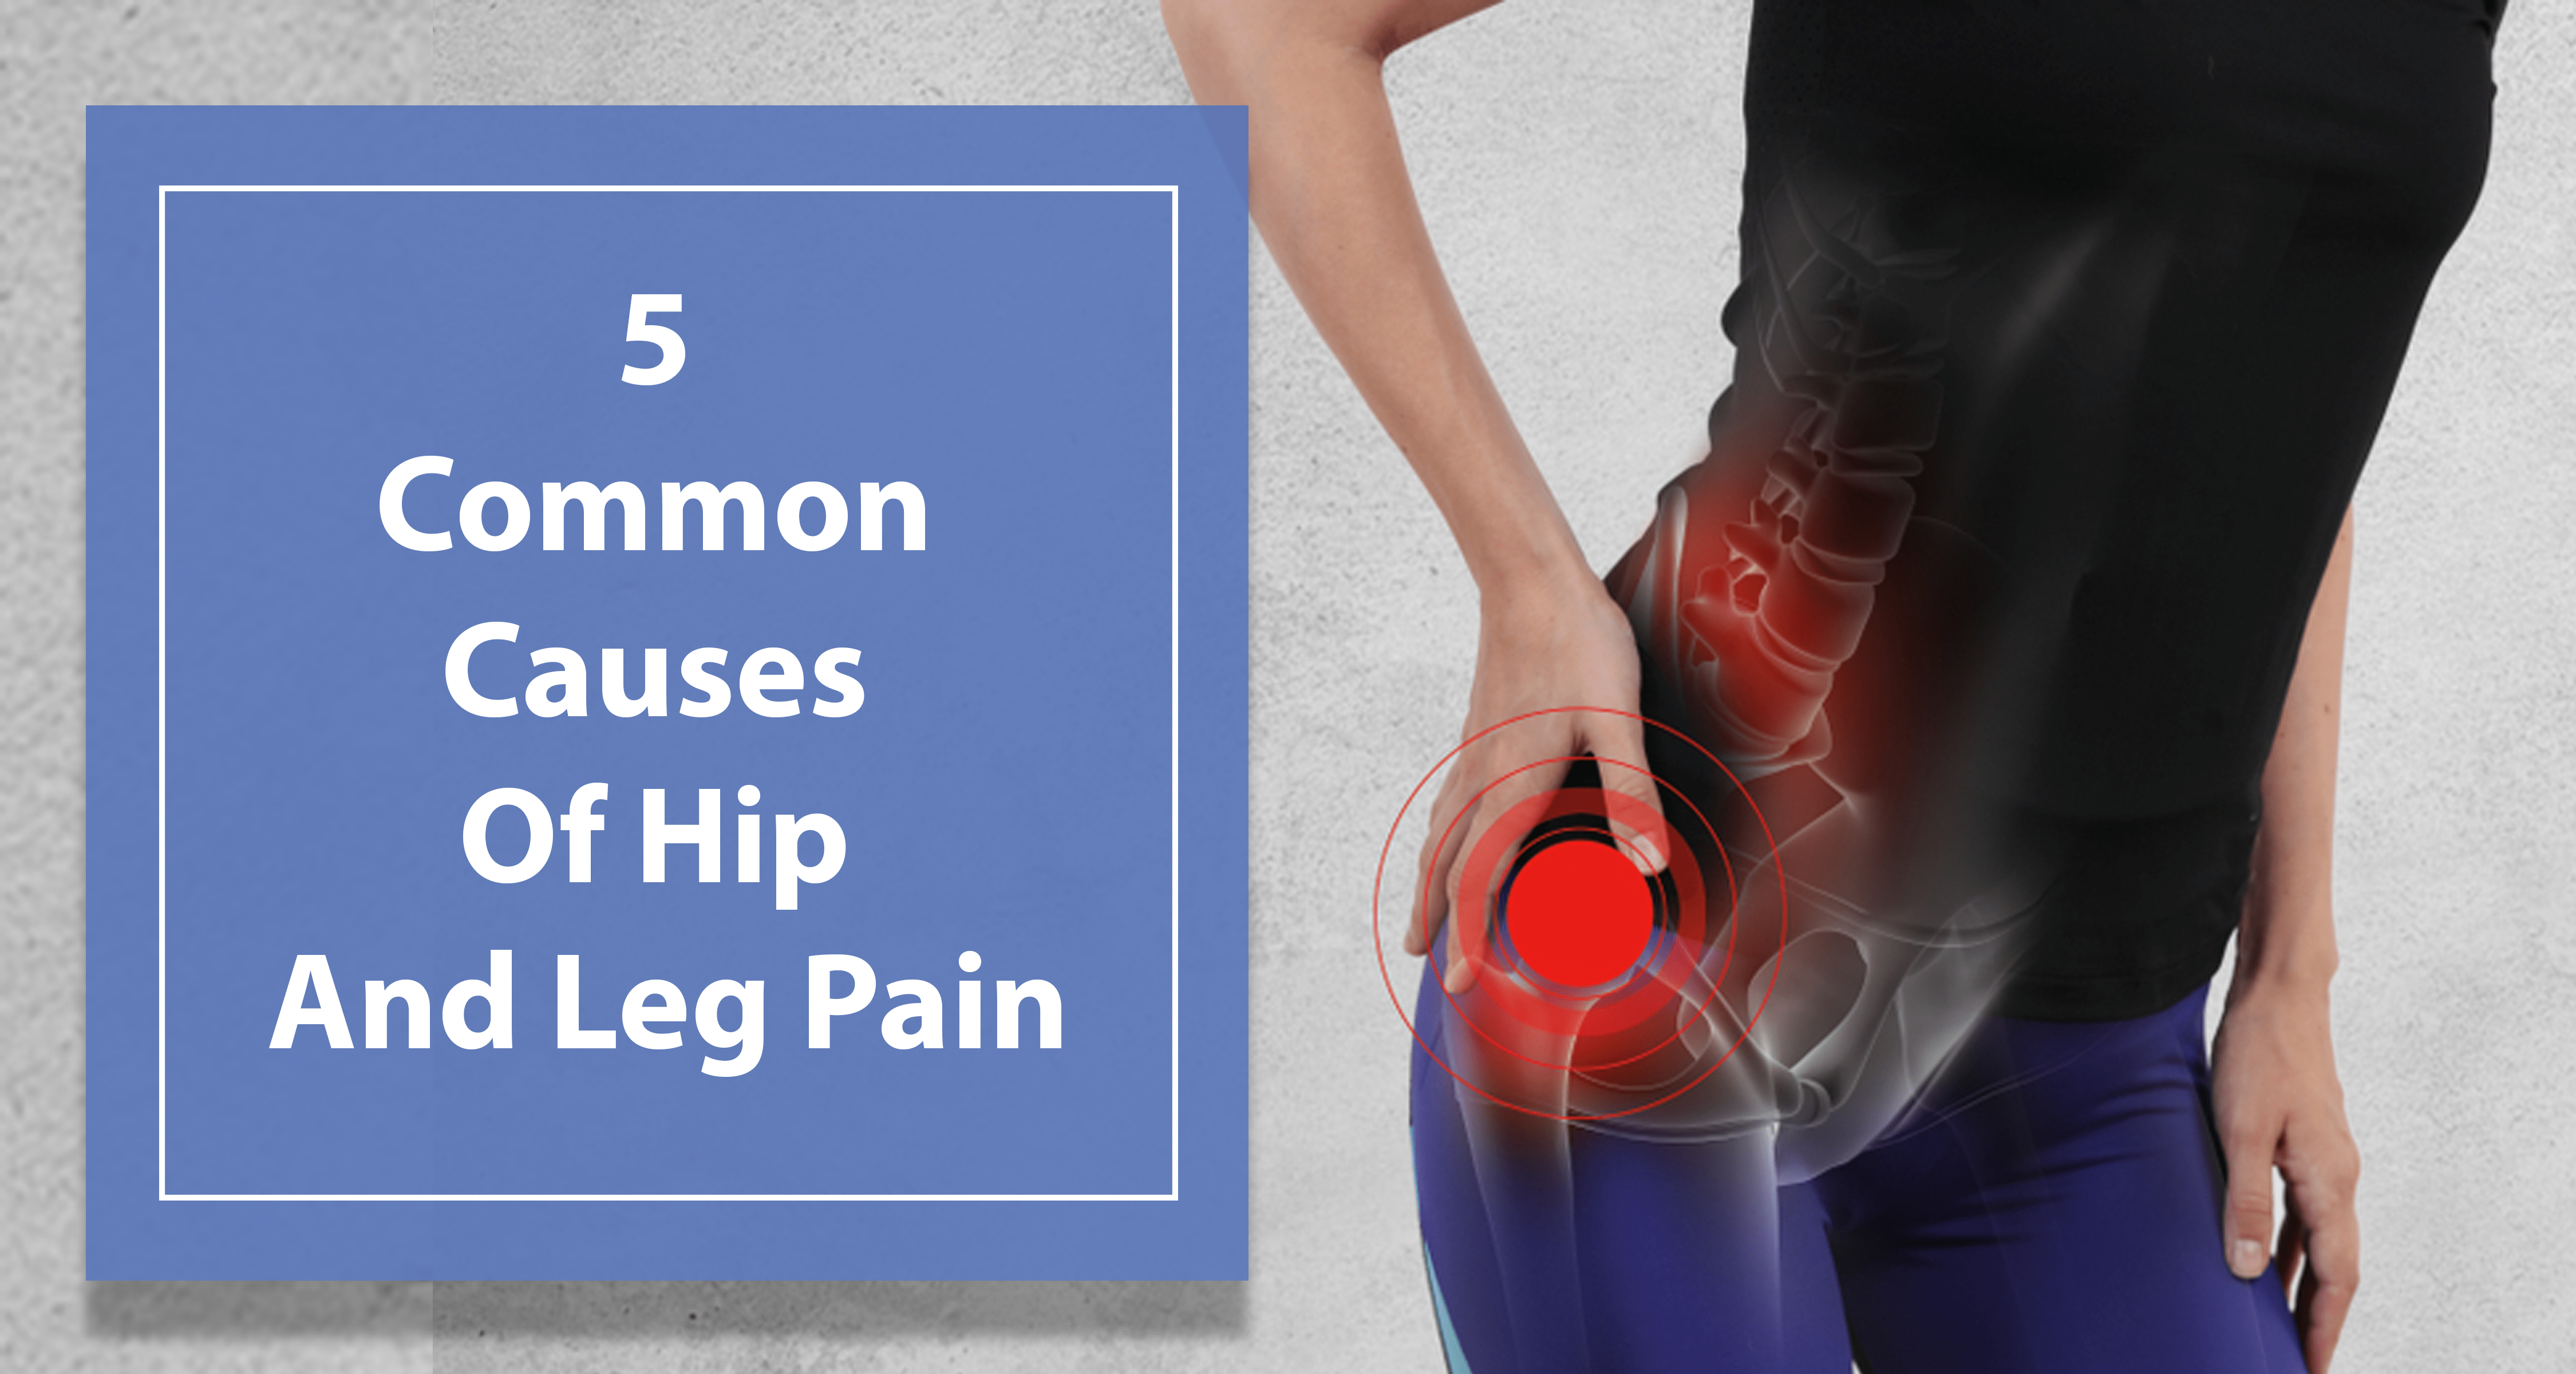 5 Common Causes Of Hip And Leg Pain That Cause You Discomfort!